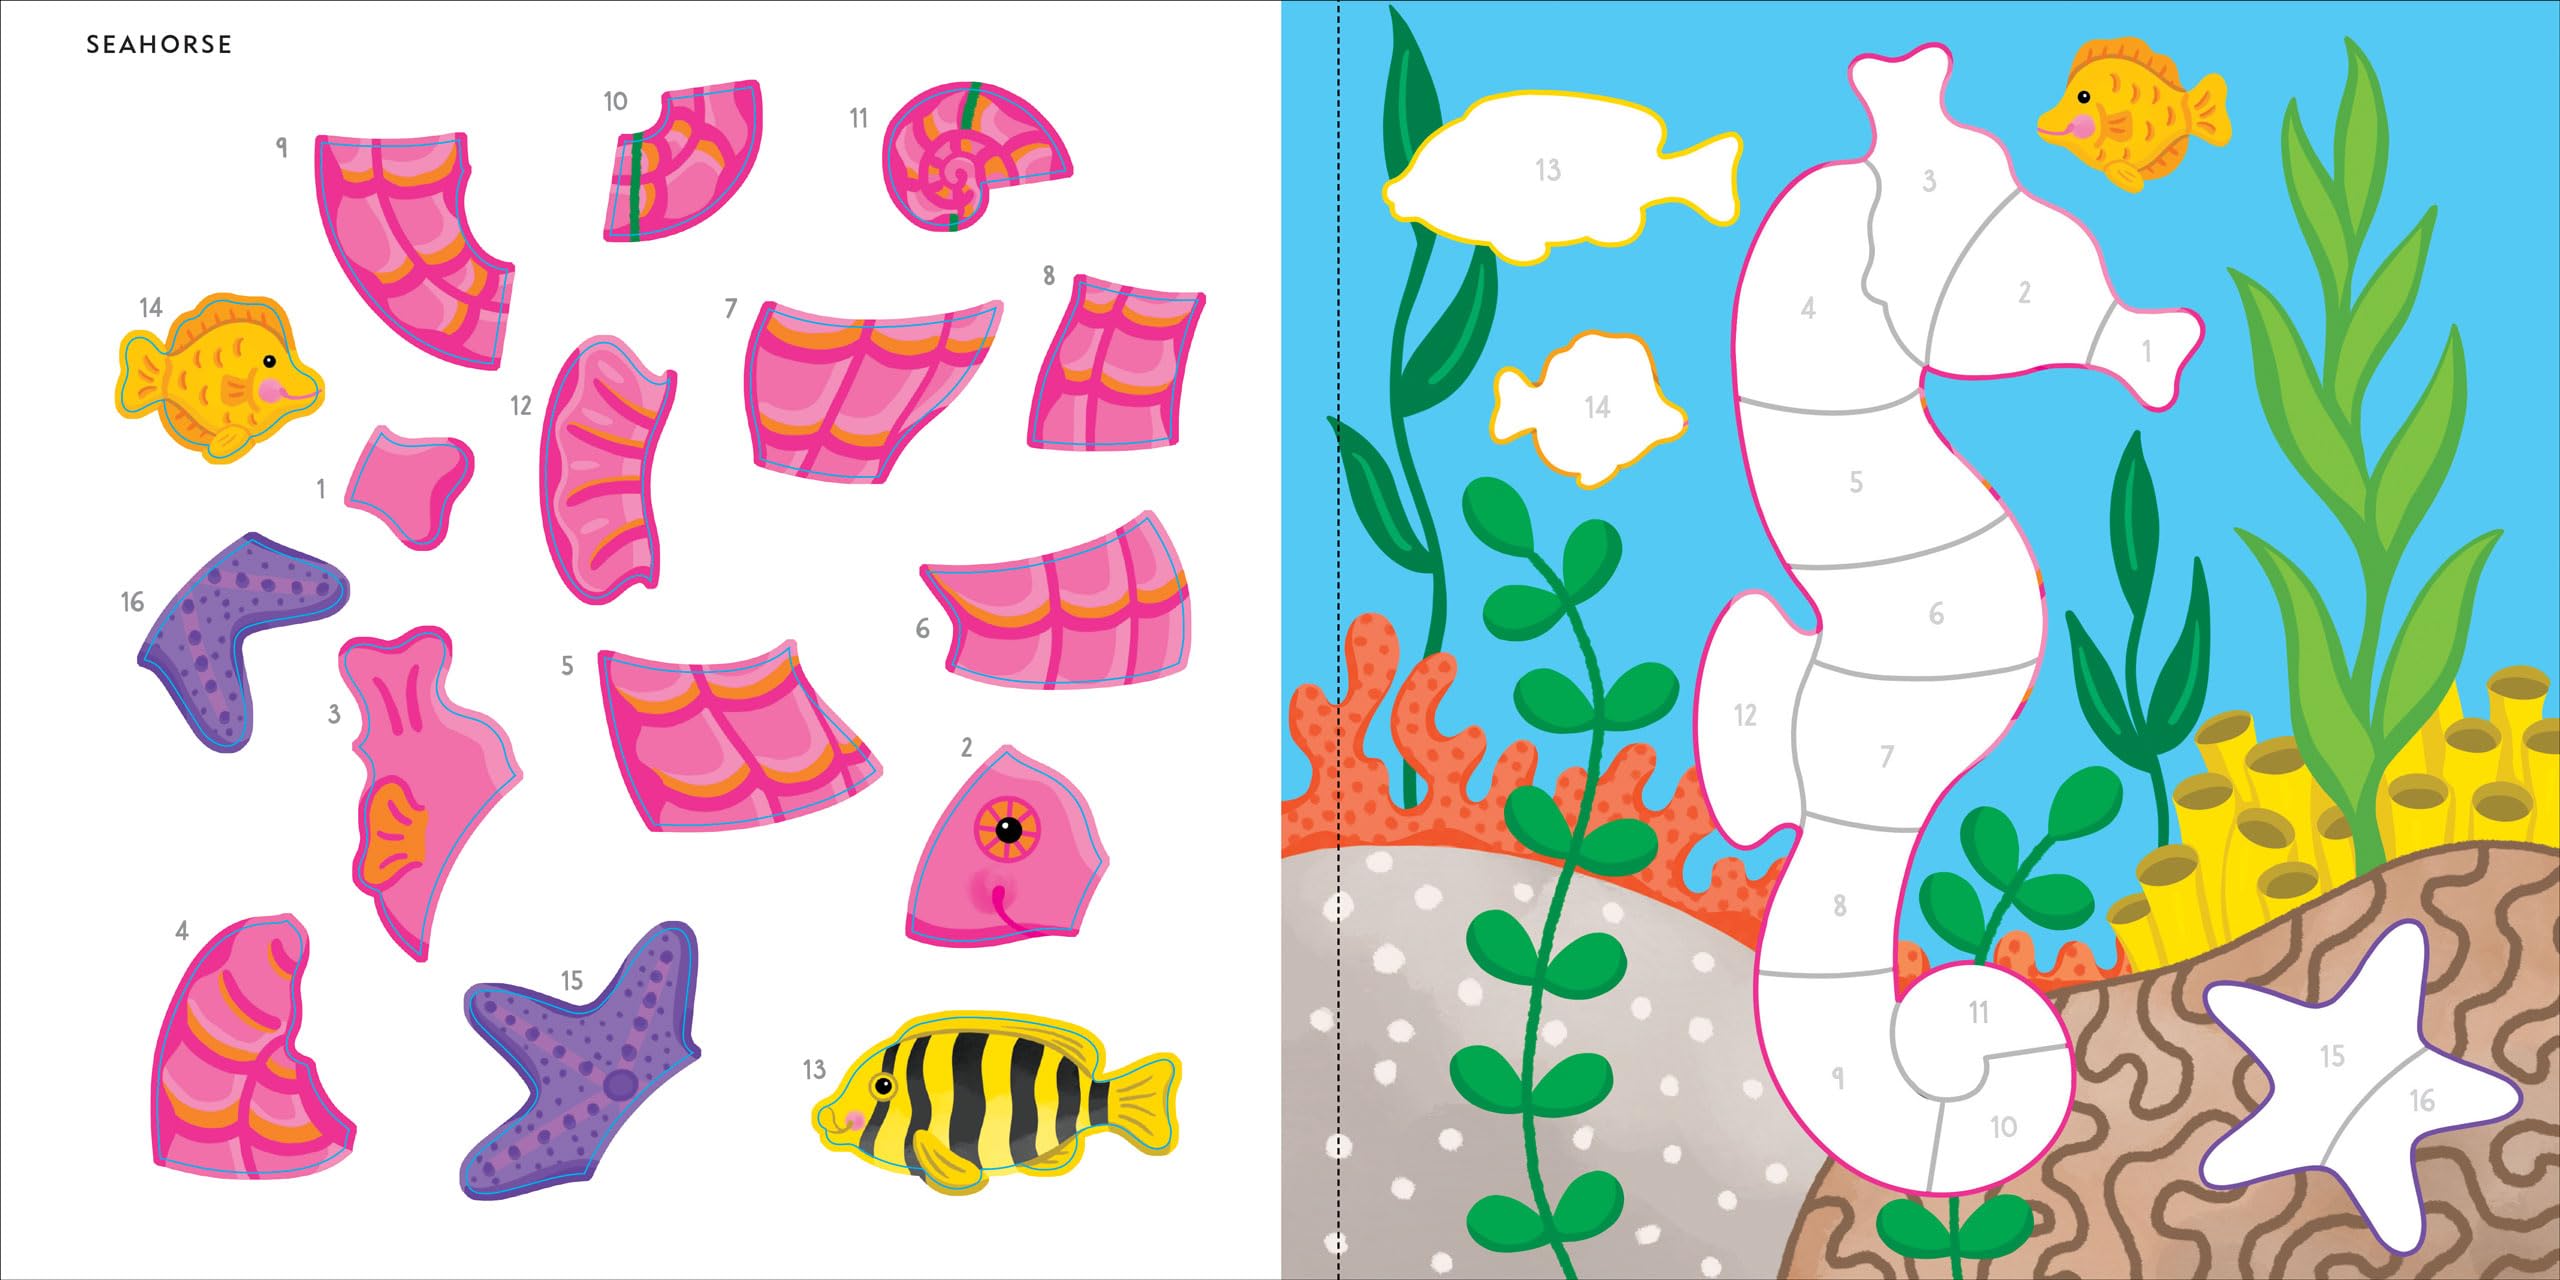 My First Color-By-Sticker Book - Under the Sea